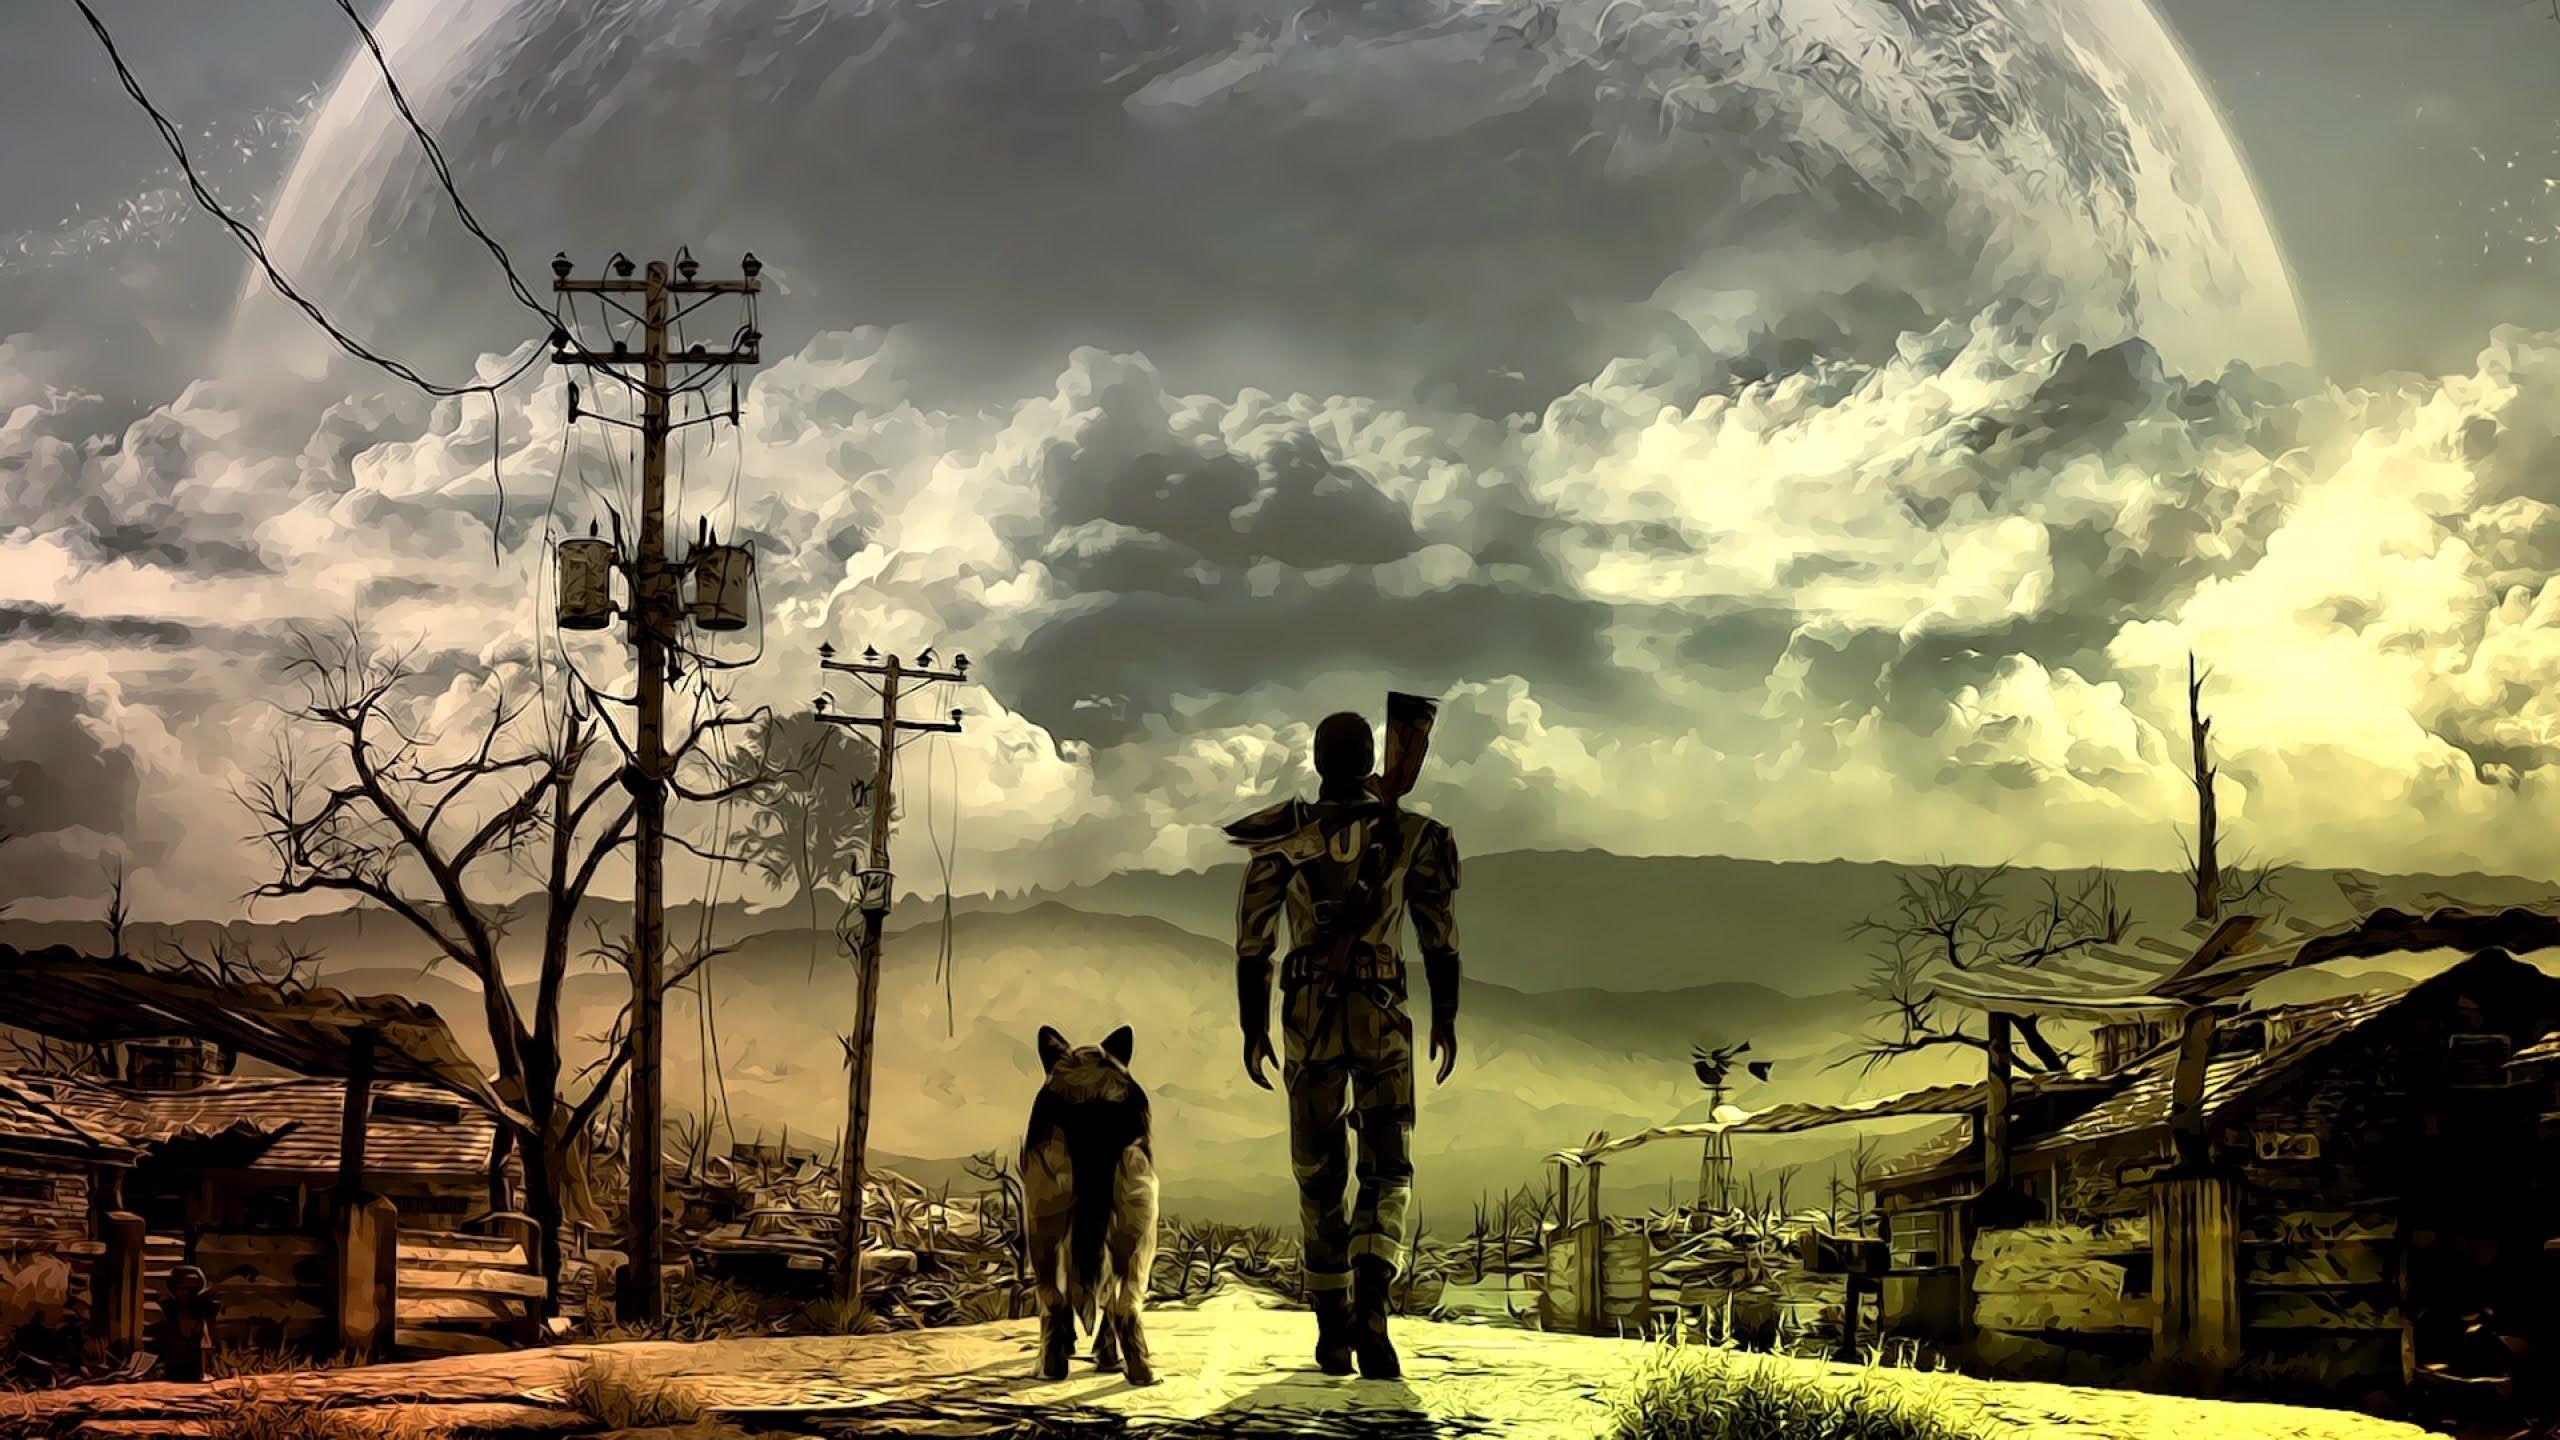 2560 x 1440 · jpeg - Fallout 4 wallpaper 1080p 1 Download free cool full HD wallpapers for ...